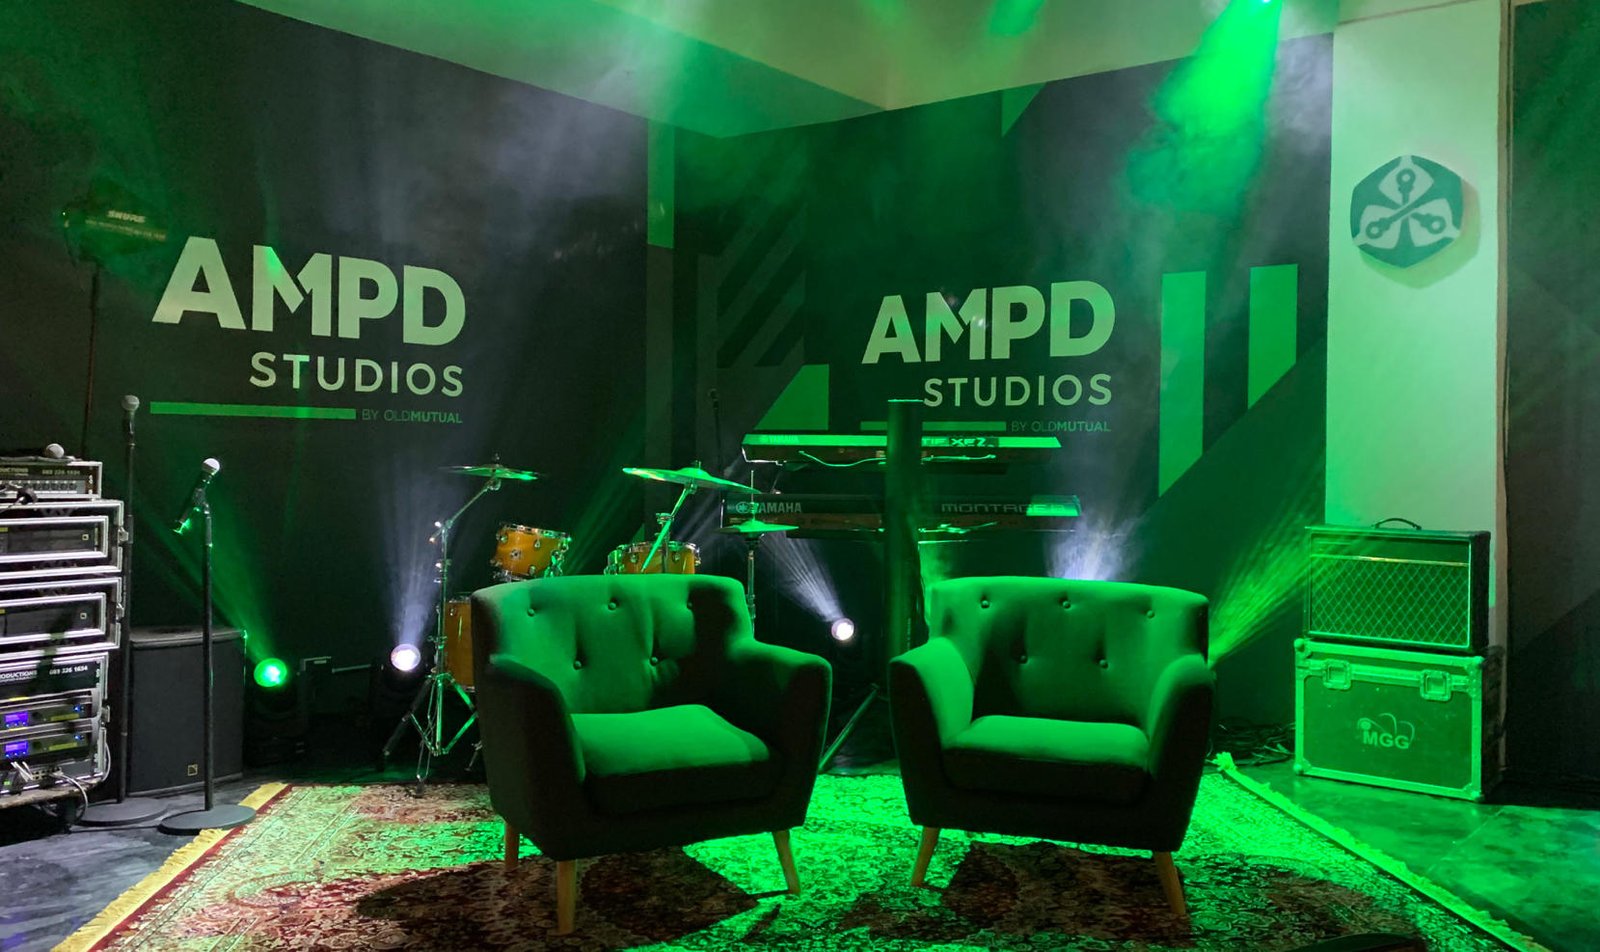 Old Mutual Launches ‘AMPD Studios’ in South Africa